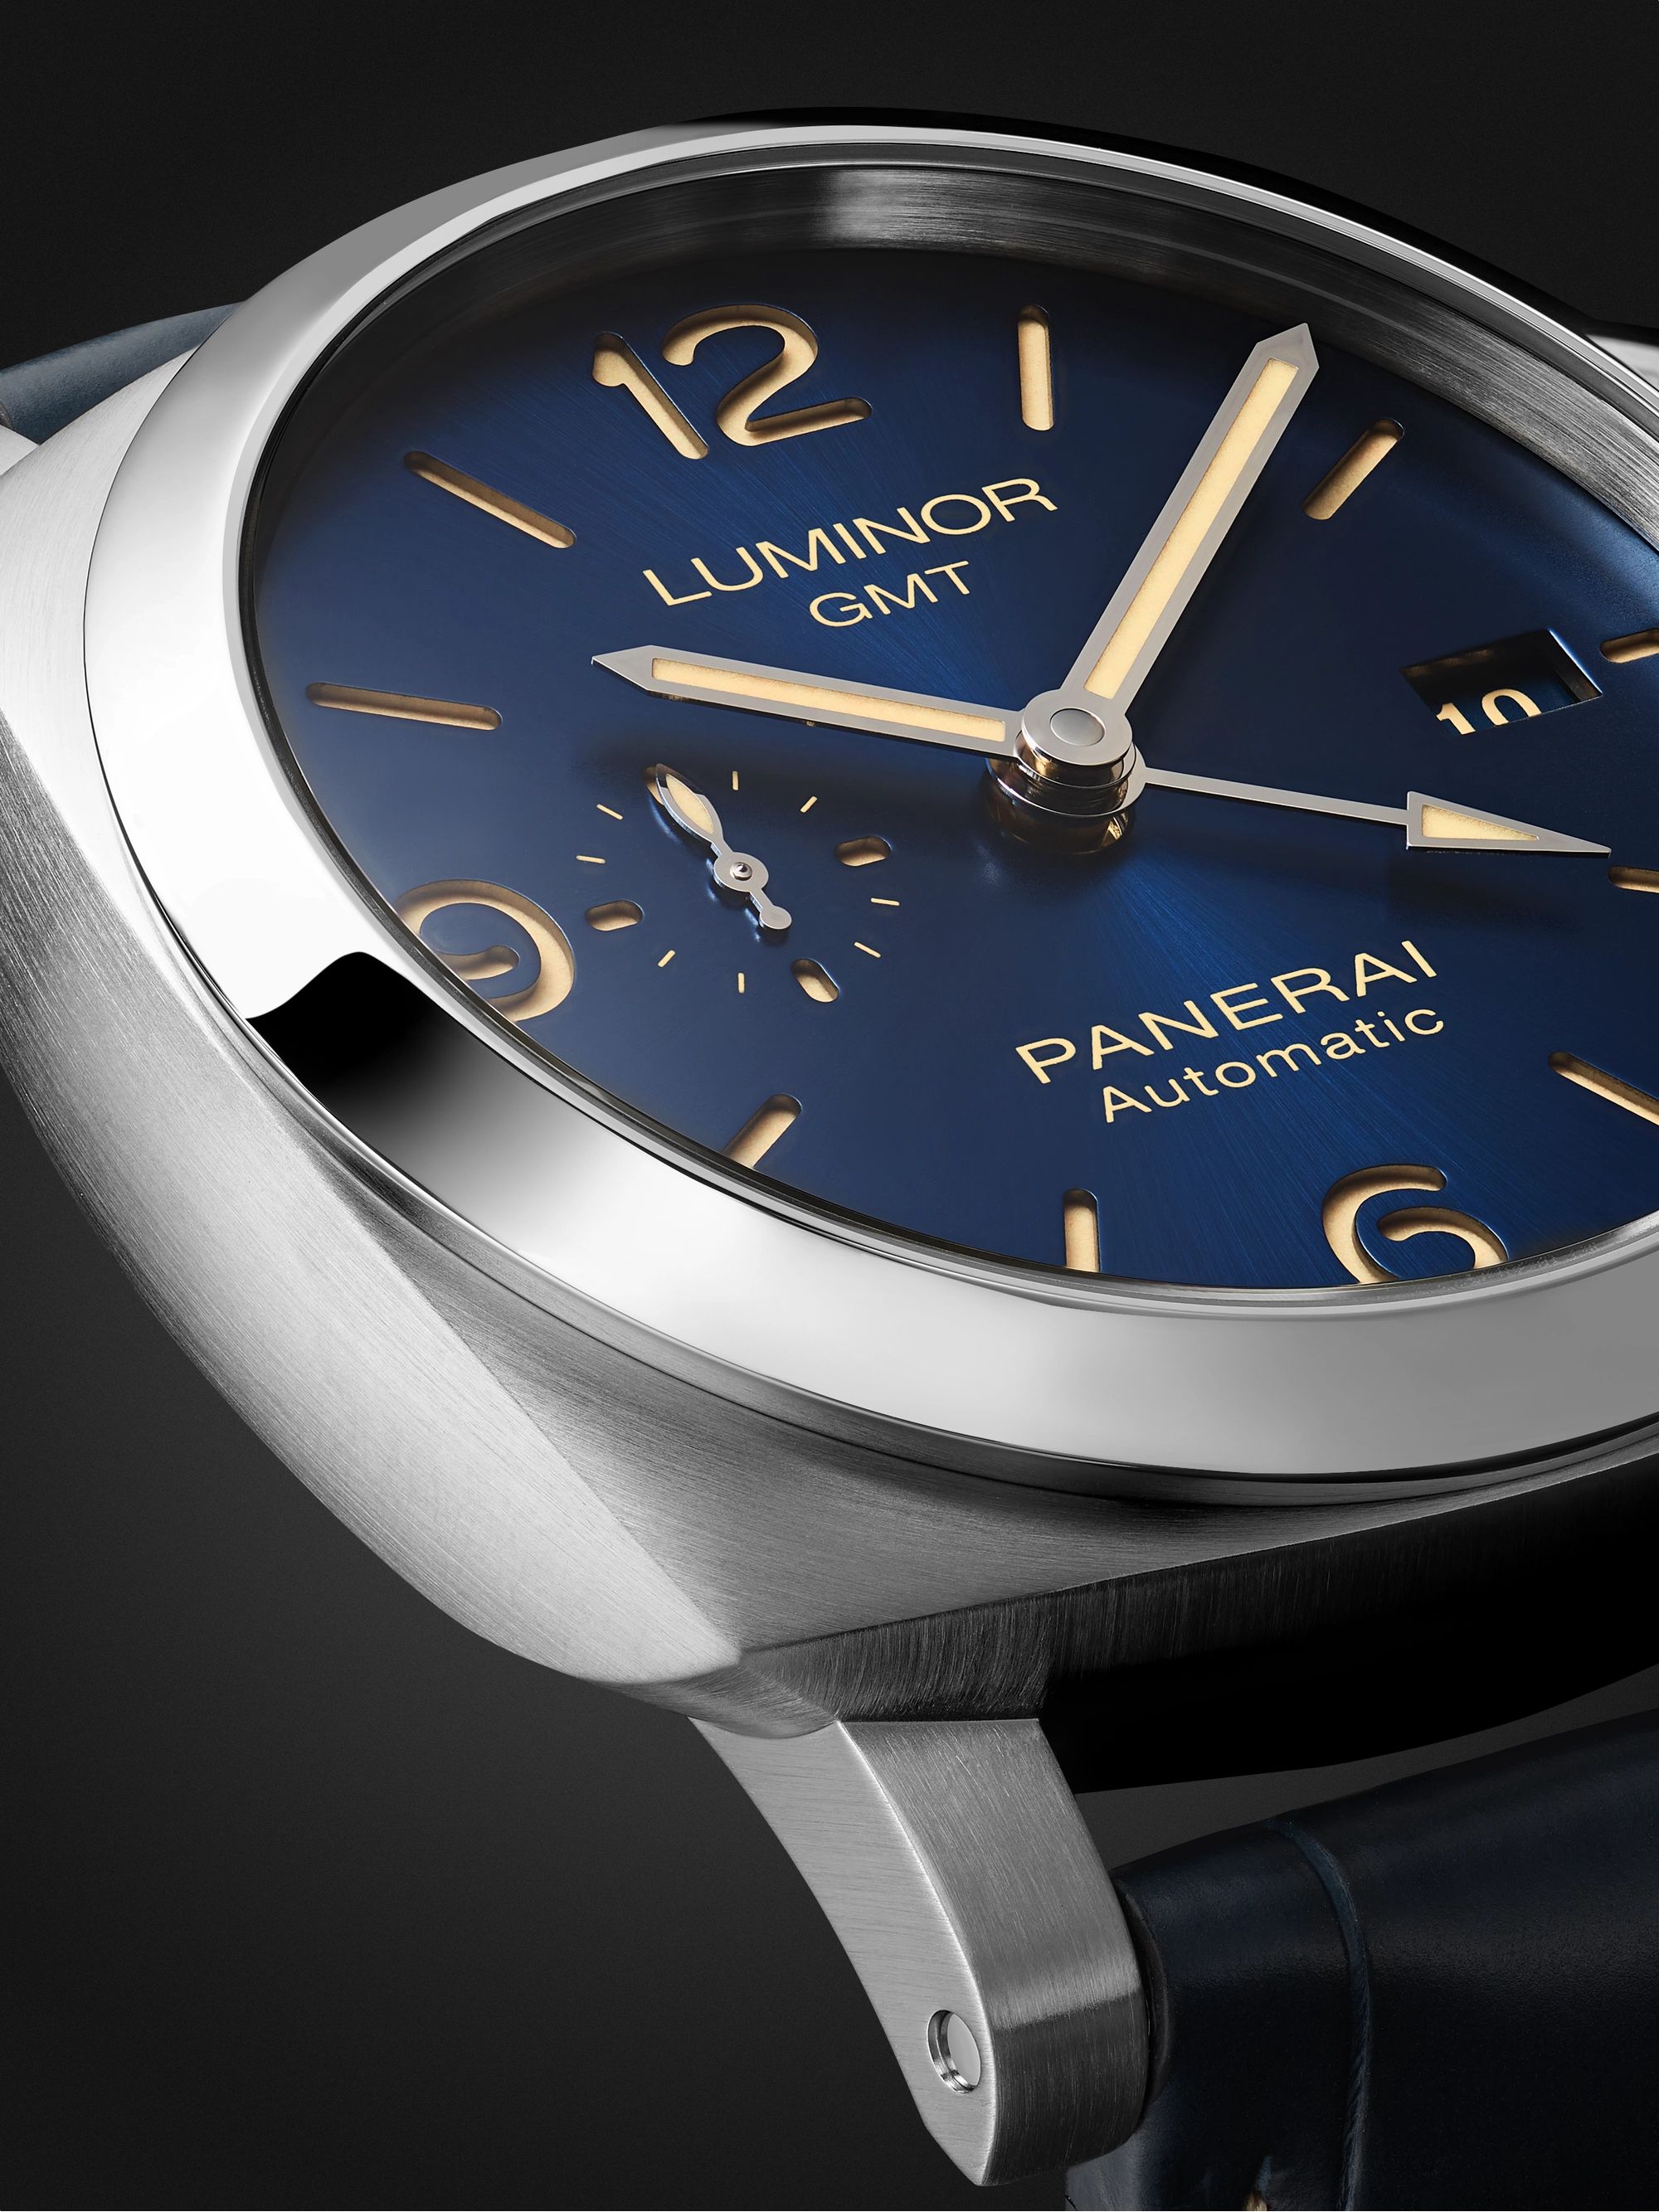 PANERAI Luminor GMT Automatic 44mm Stainless Steel and Alligator Watch, Ref. No. PAM01033